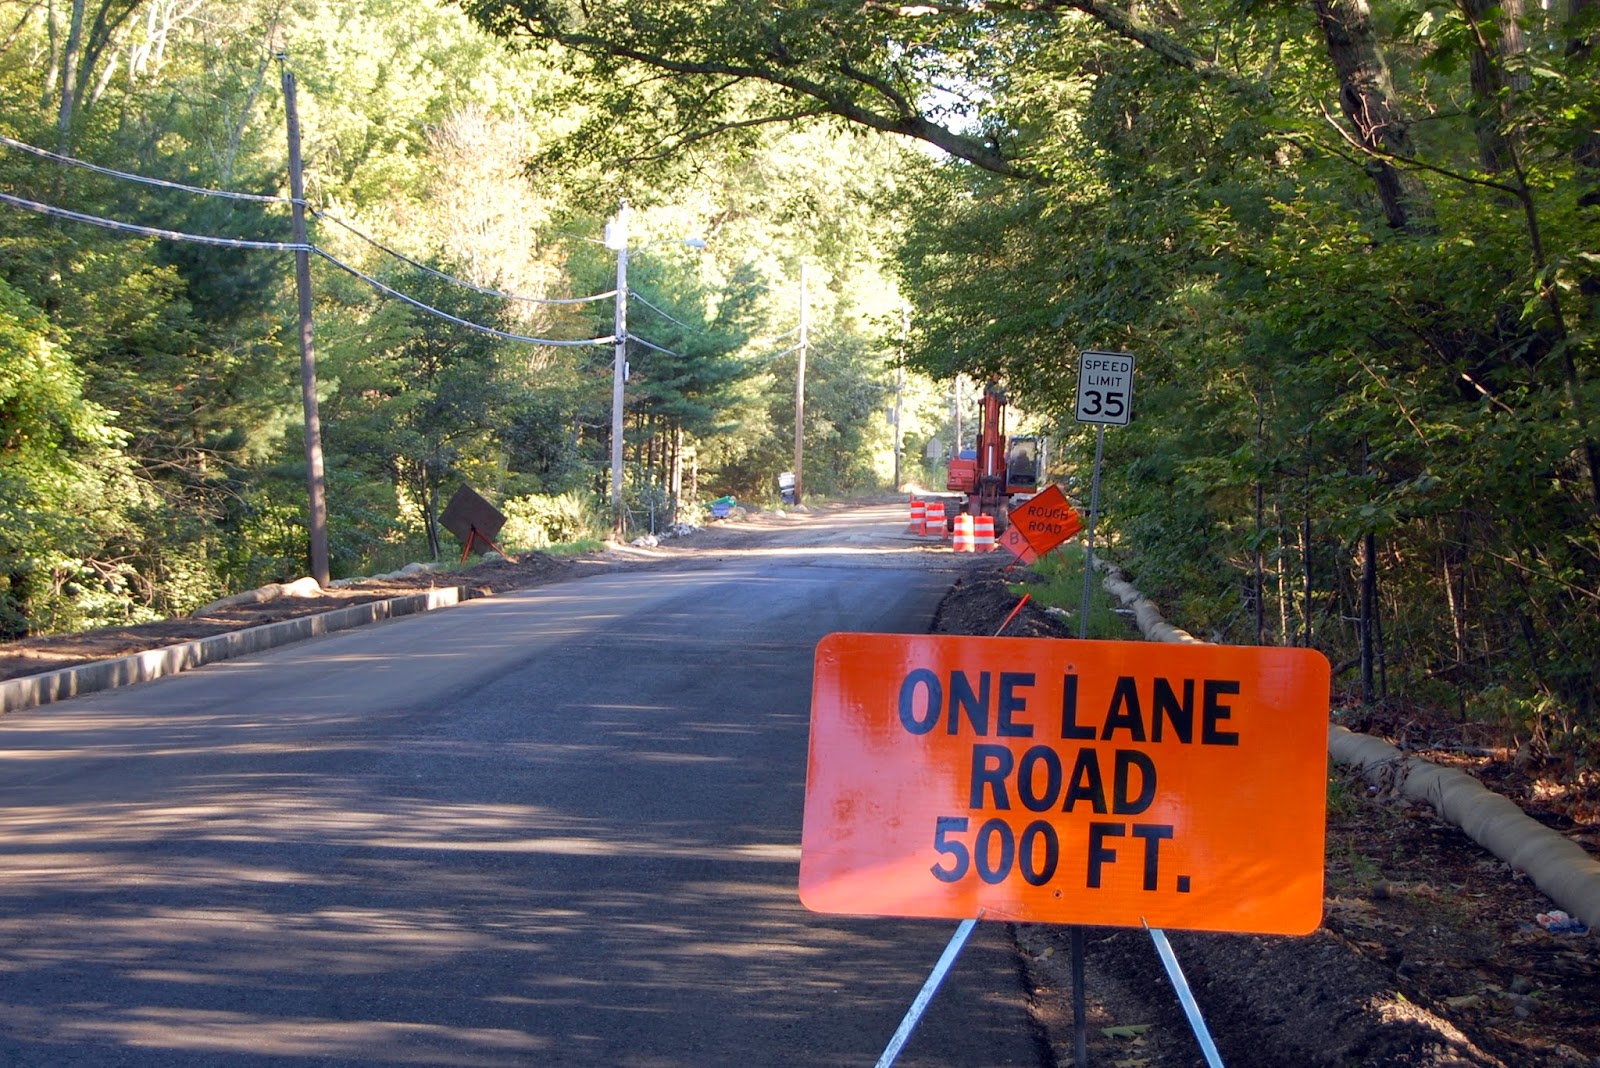 Lincoln St road work during Aug 2014